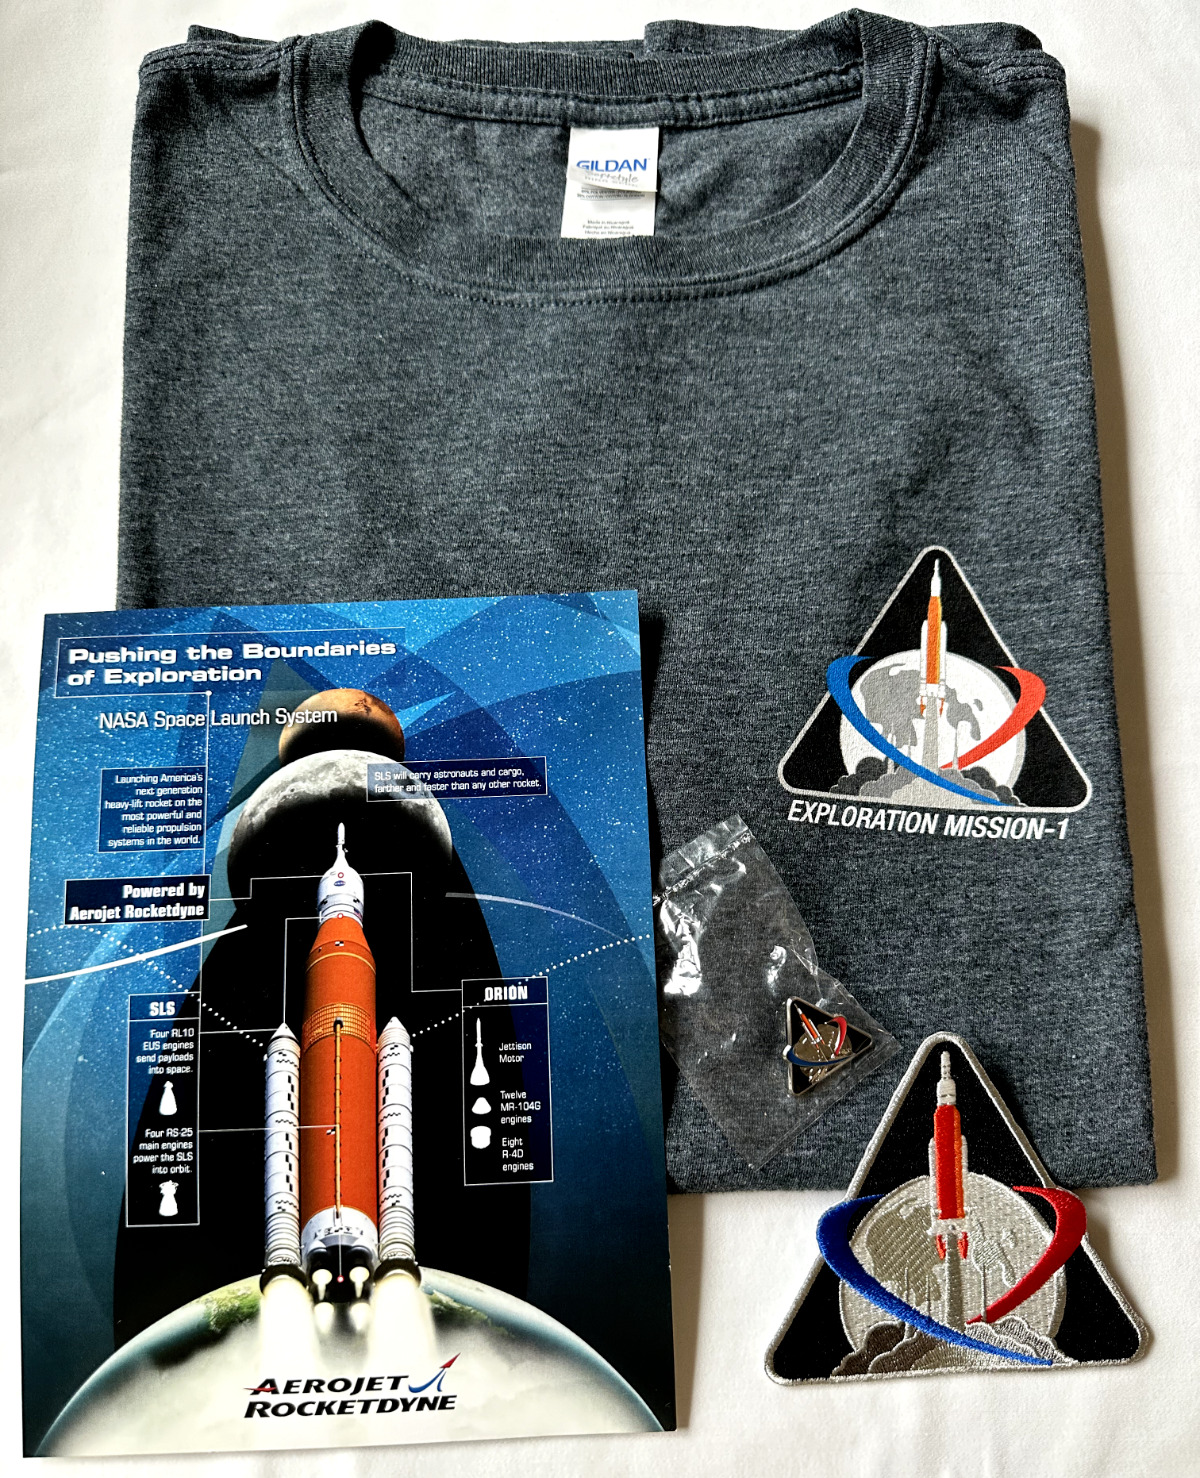 Authentic NASA SLS Exploration Mission-1 Patch, Pin, and T-Shirt (size Large)